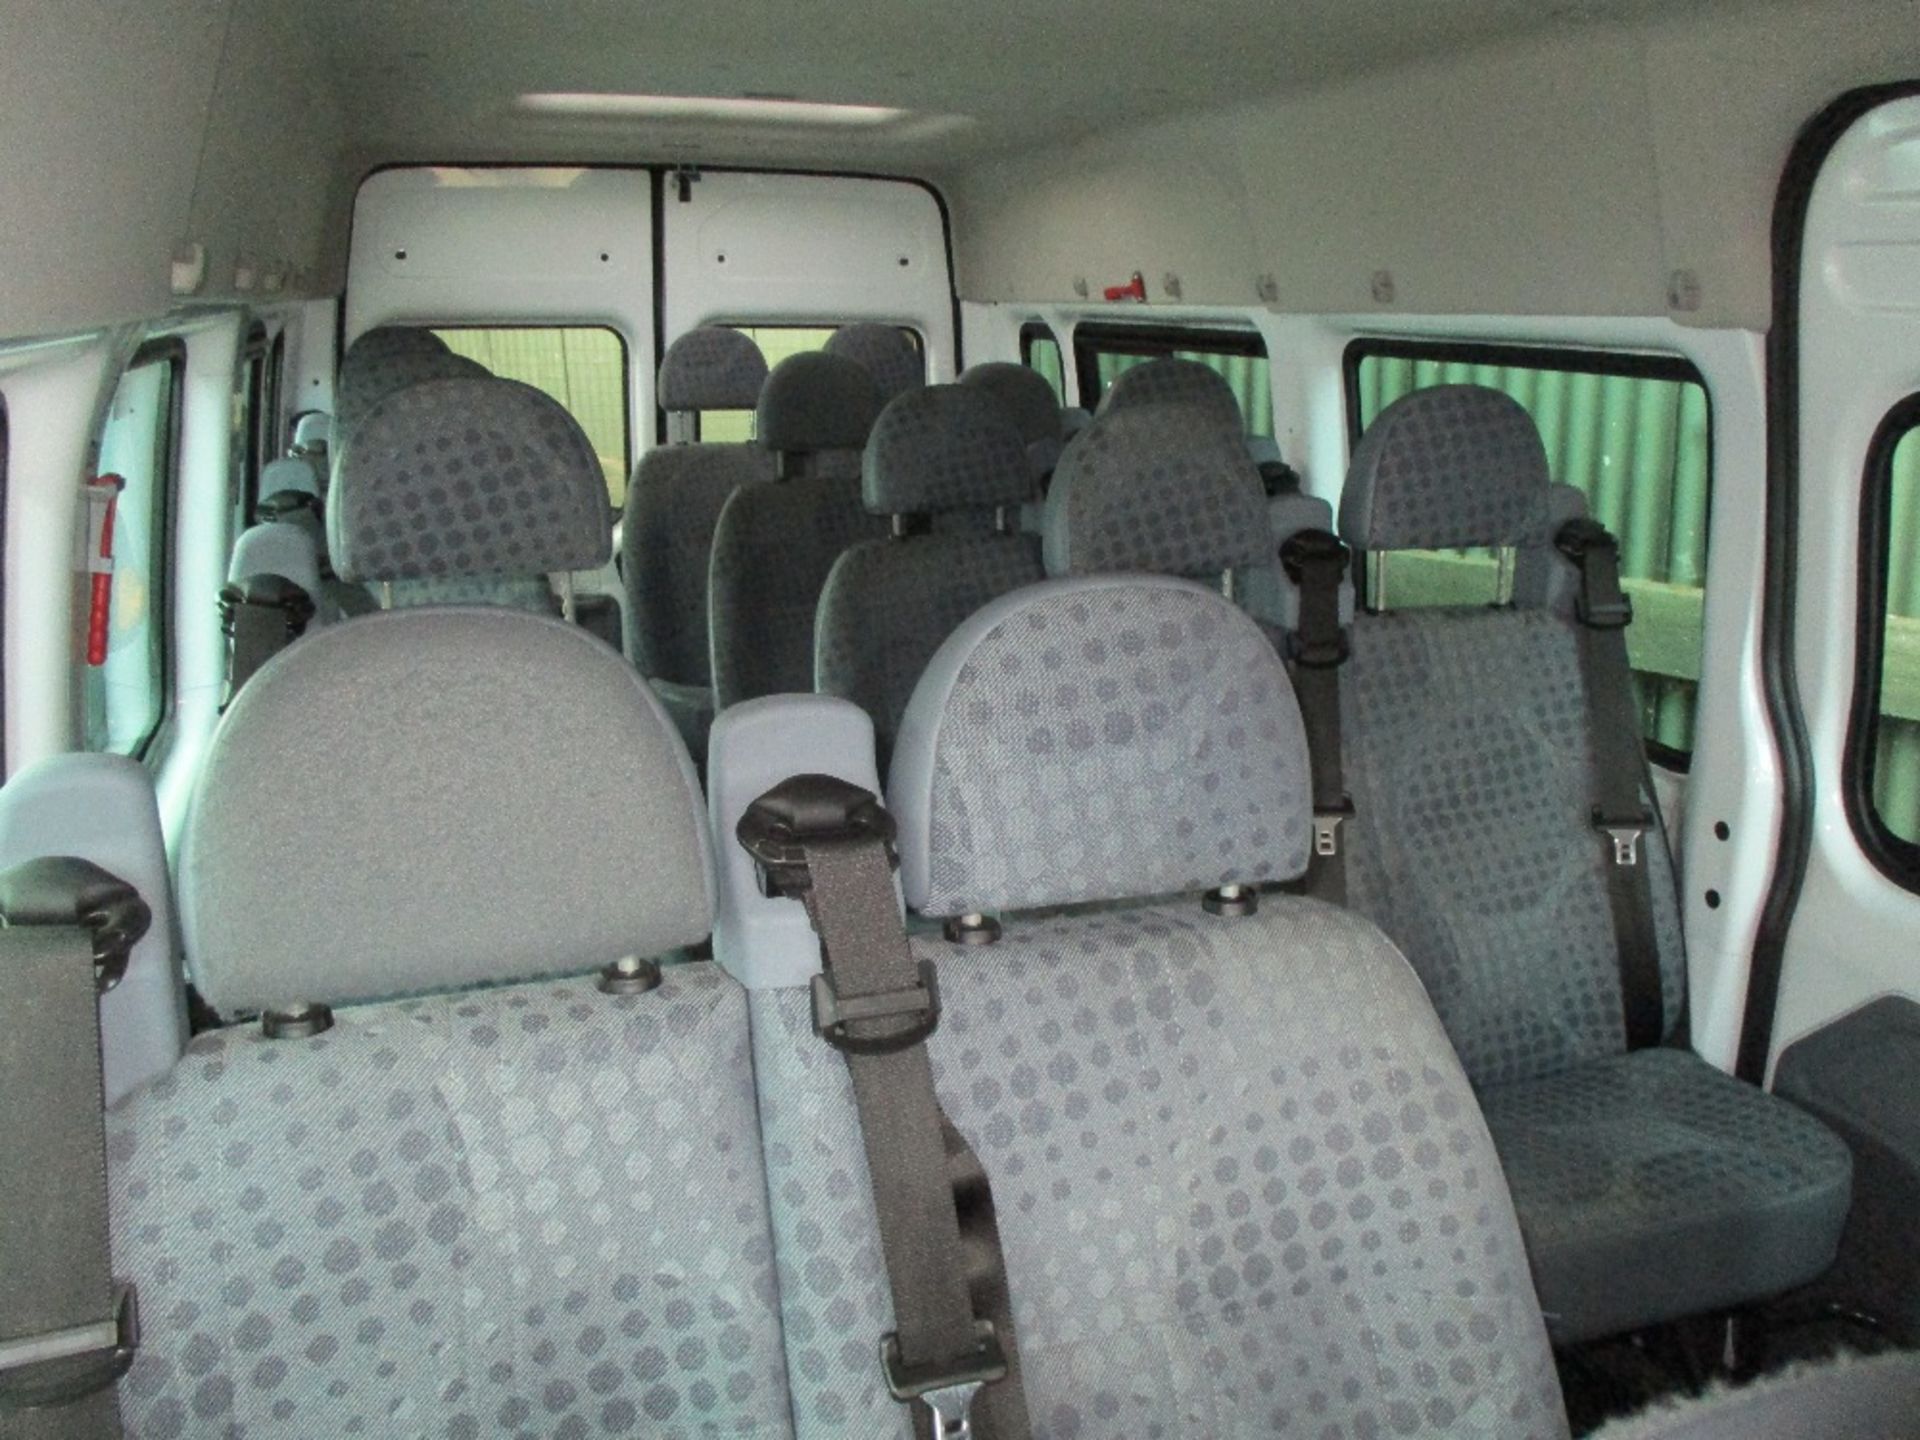 Ford Transit mini bus, 17 seats in total, REG:BD63 OEF previously damaged and repaired, 34,680rec. - Image 3 of 7